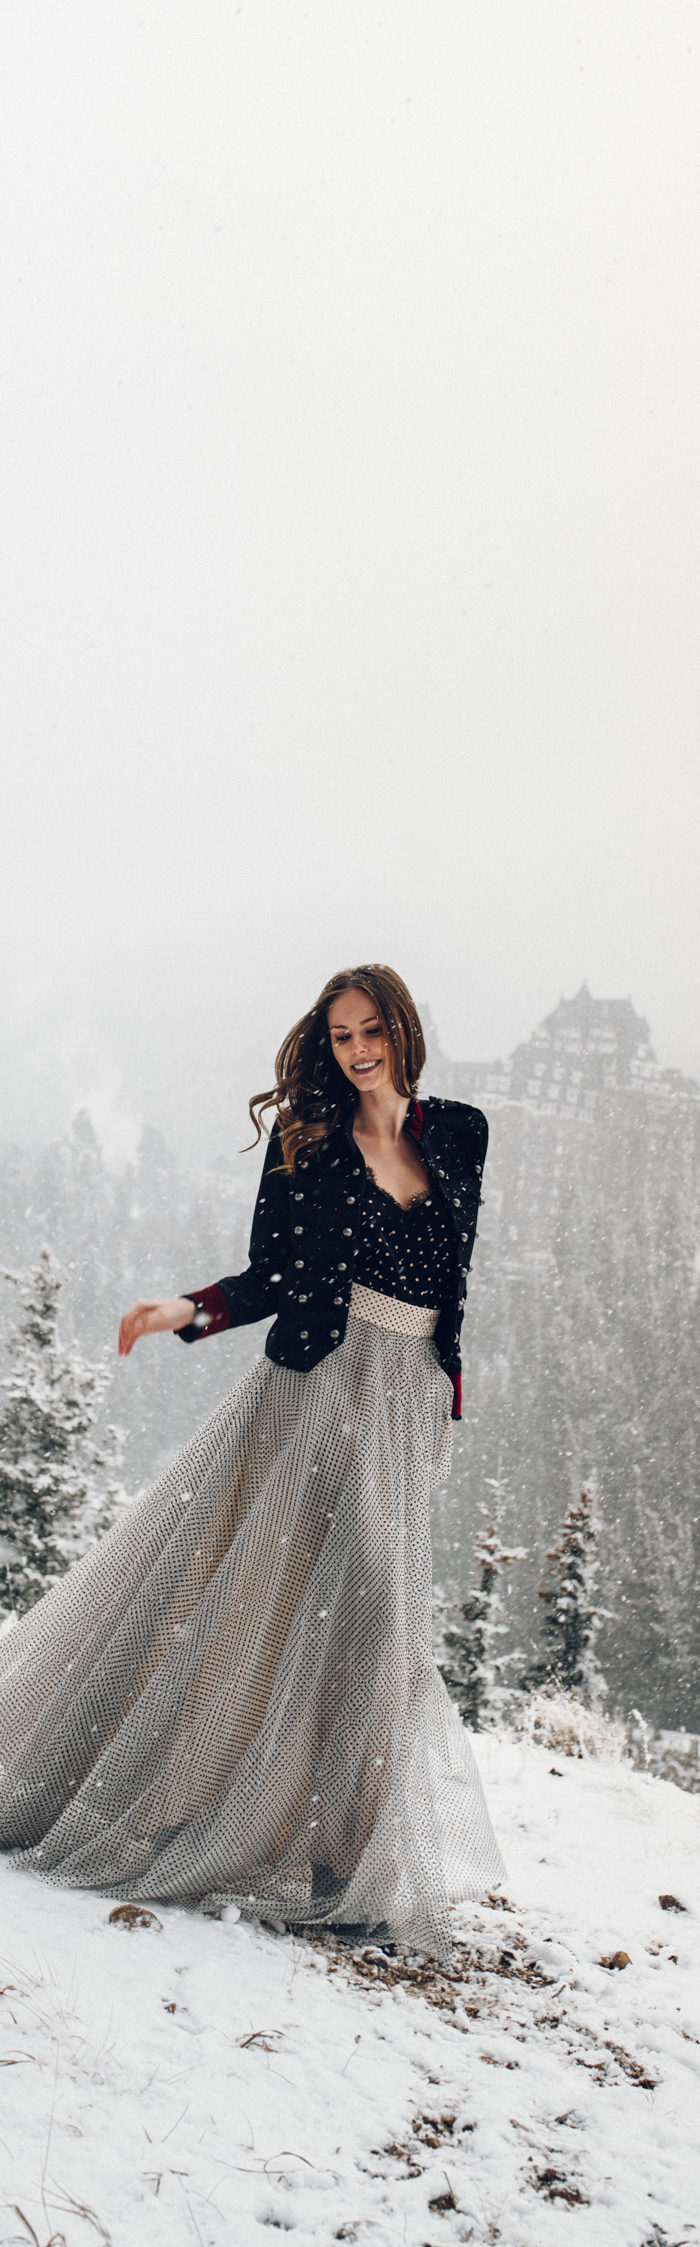 Alyssa Campanella of The A List blog experiences romance in the snow with her husband in Banff, Alberta, Canada at the Fairmont Banff Springs wearing Zimmermann Tempest ballet skirt